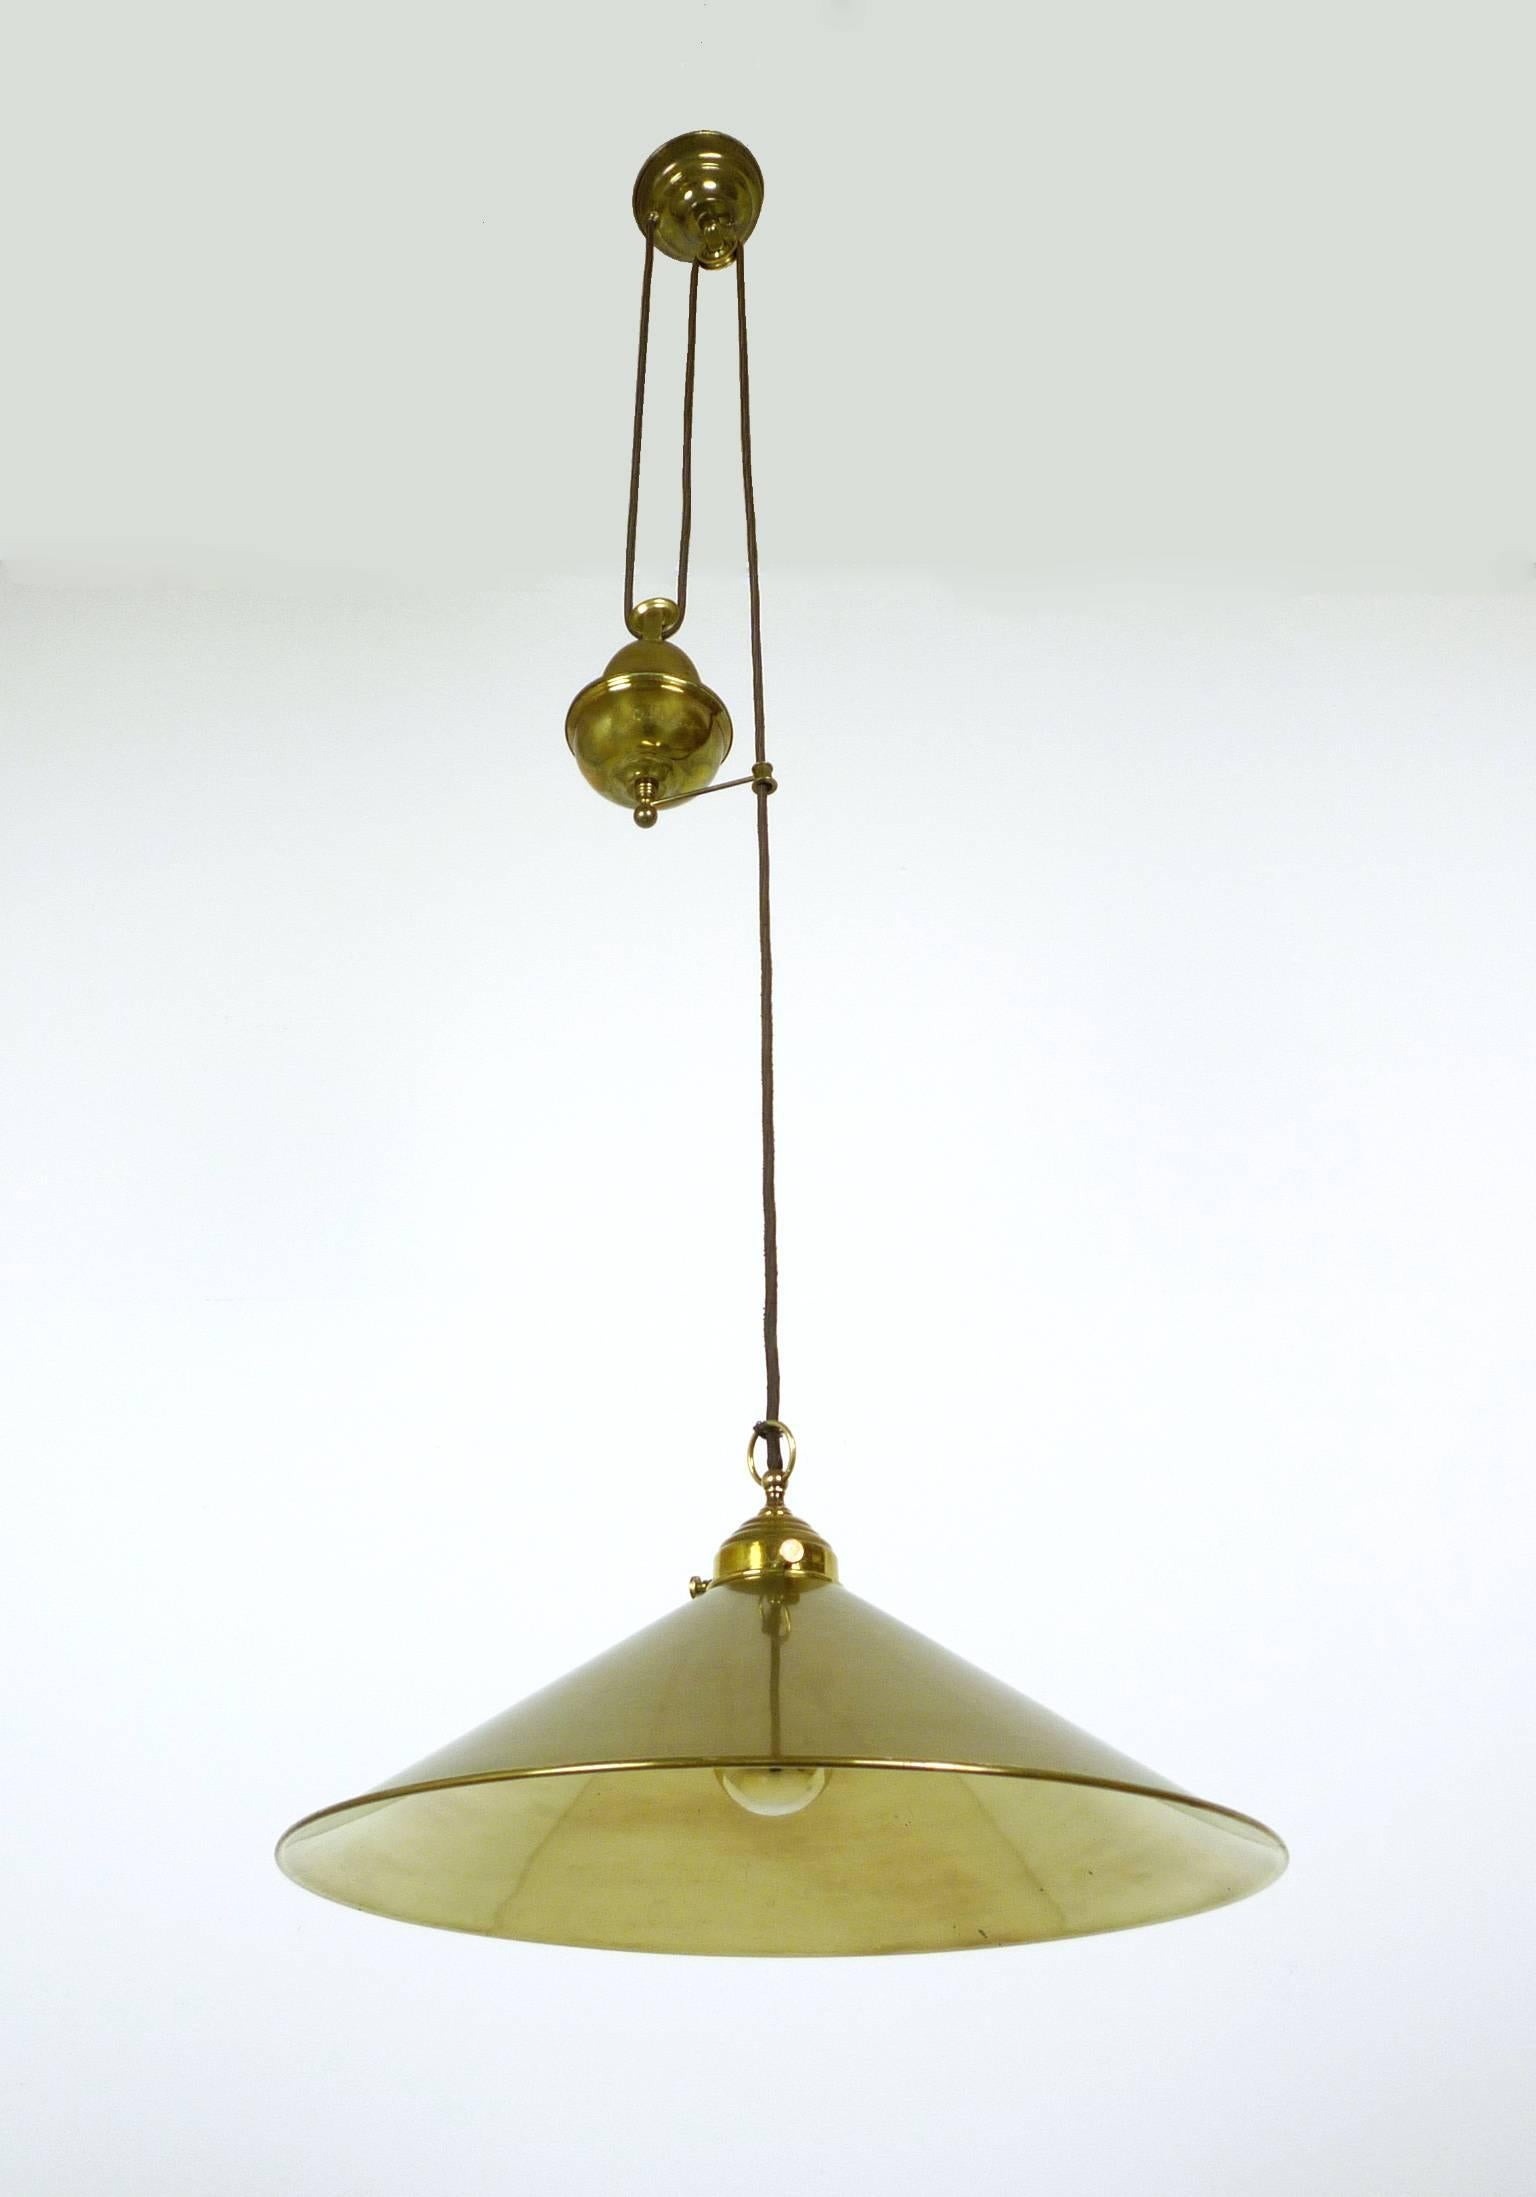 German pulley lamp in brass with counterweight from the 1950s. The height is adjustable from 115 to 235 cm. It is illuminated by an E27 socket.
This pulley lamp is in a good original condition.